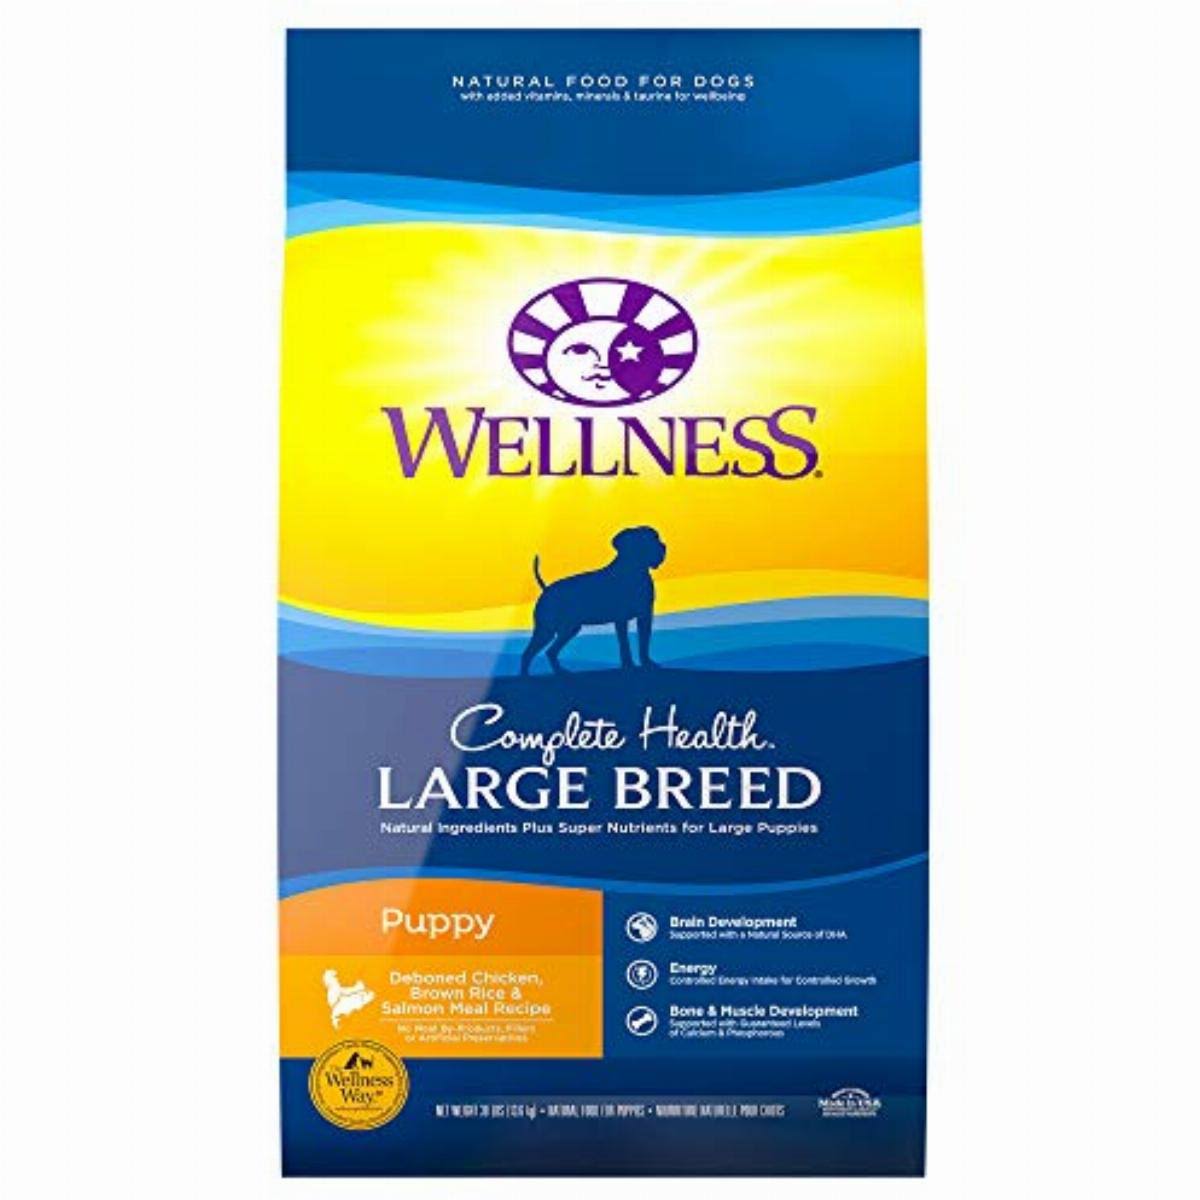 Wellness Complete Health Natural Dry Large Breed Puppy Food - Chicken, Salmon and Rice, 30lb